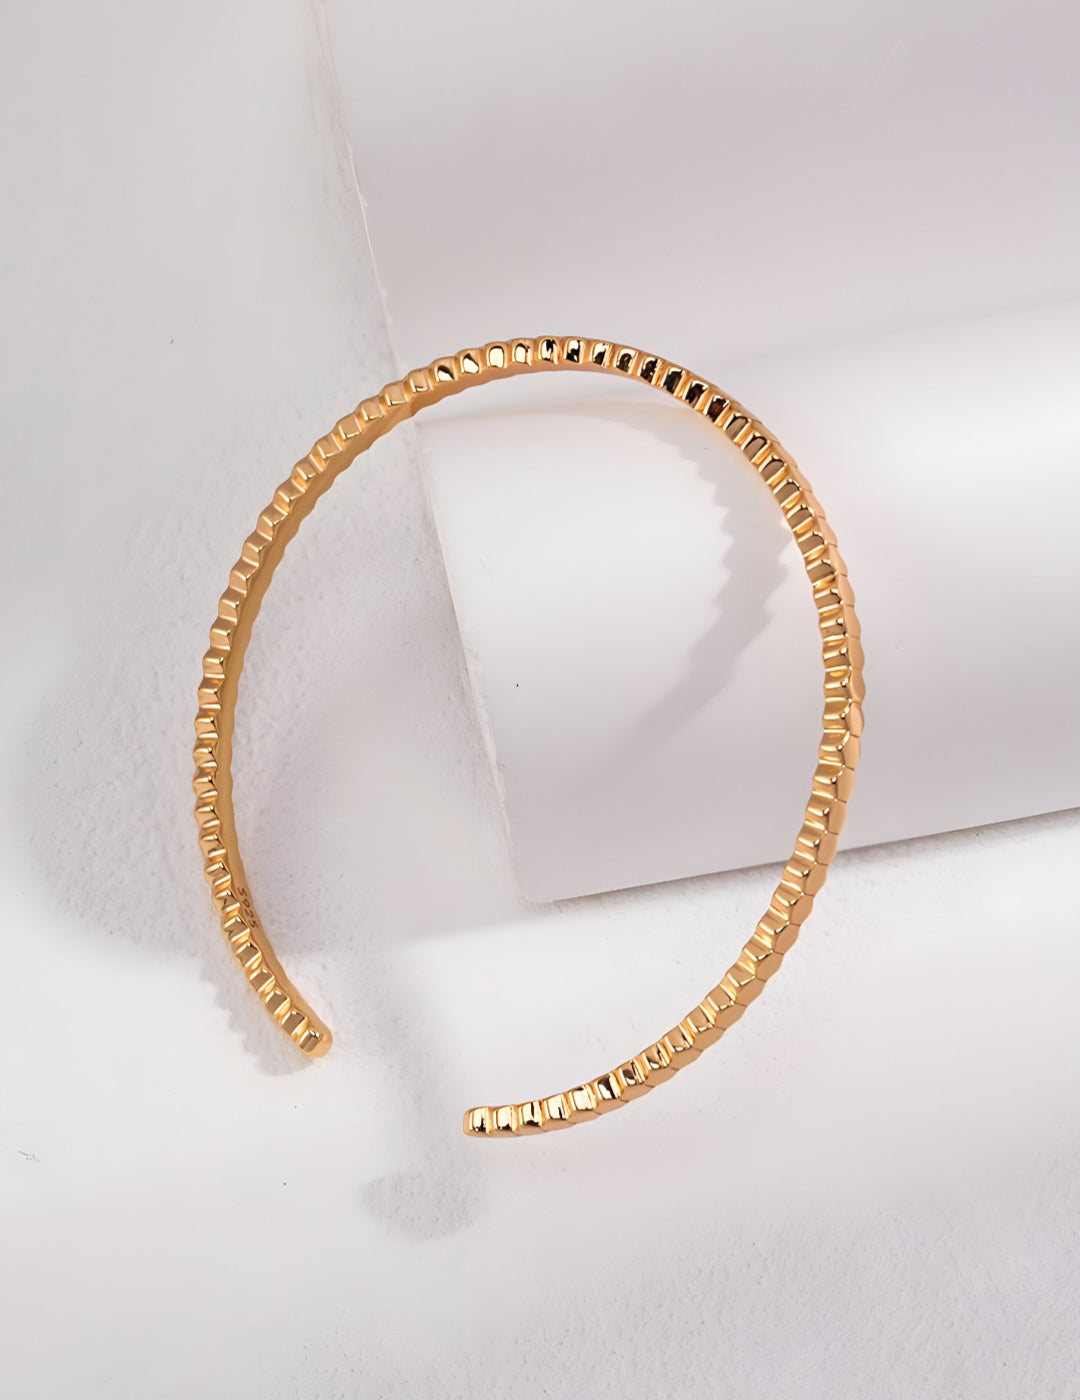 Embrace Contemporary Elegance - Cuff Bracelet - S925 Sterling Silver with 18K Gold Vermeil   - Define your contemporary style - Timeless design and radiant charm are perfect for any occasion